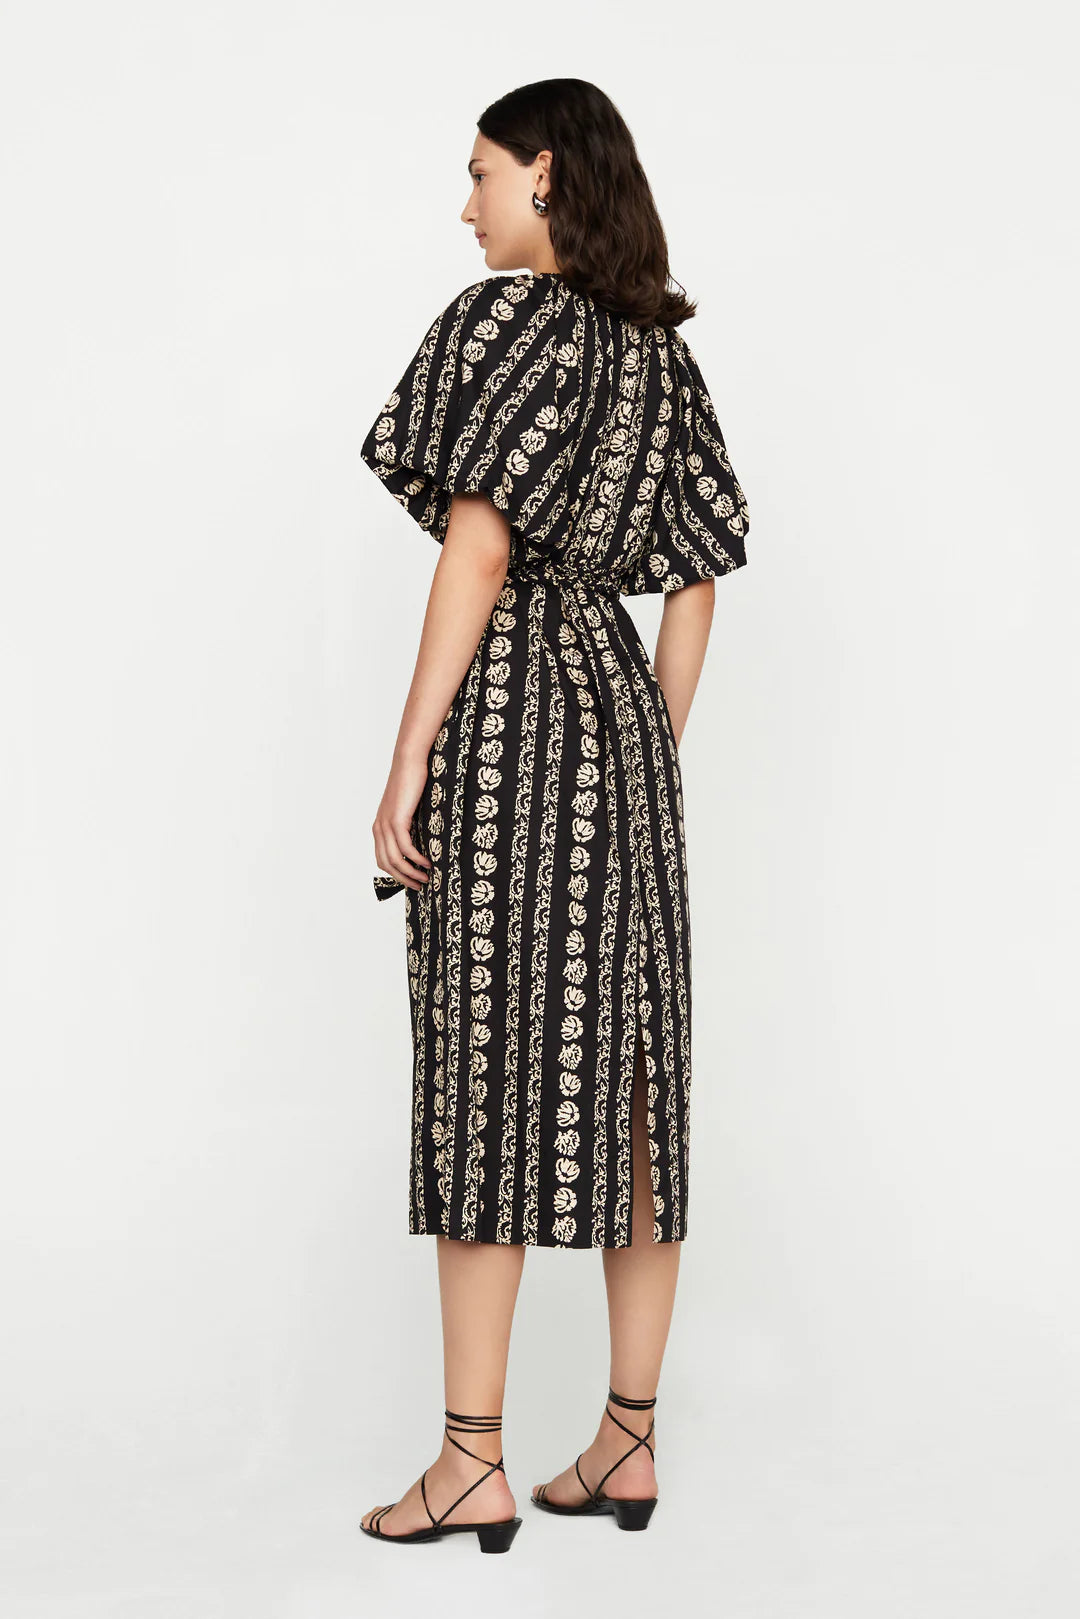 Marie Oliver Foster Dress | Raven Rows